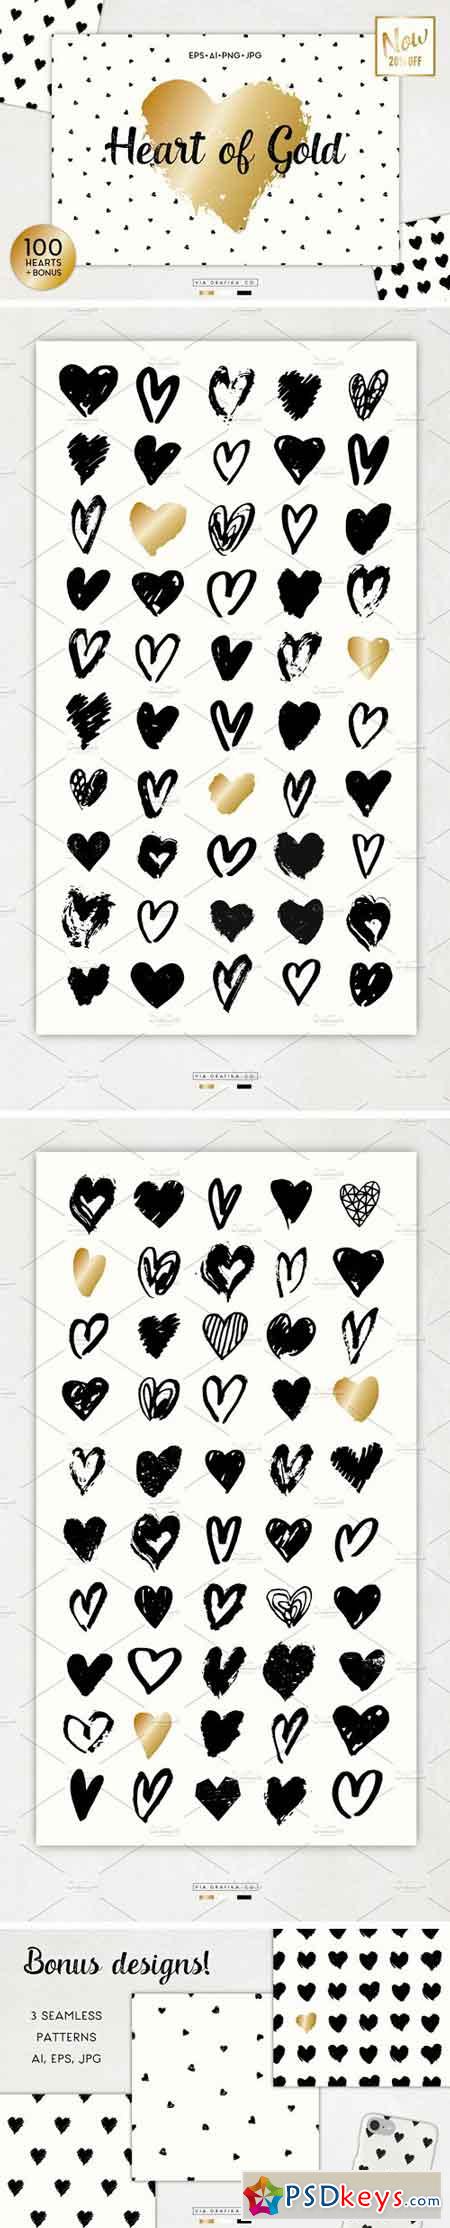 Heart of Gold Graphics Set 1173015